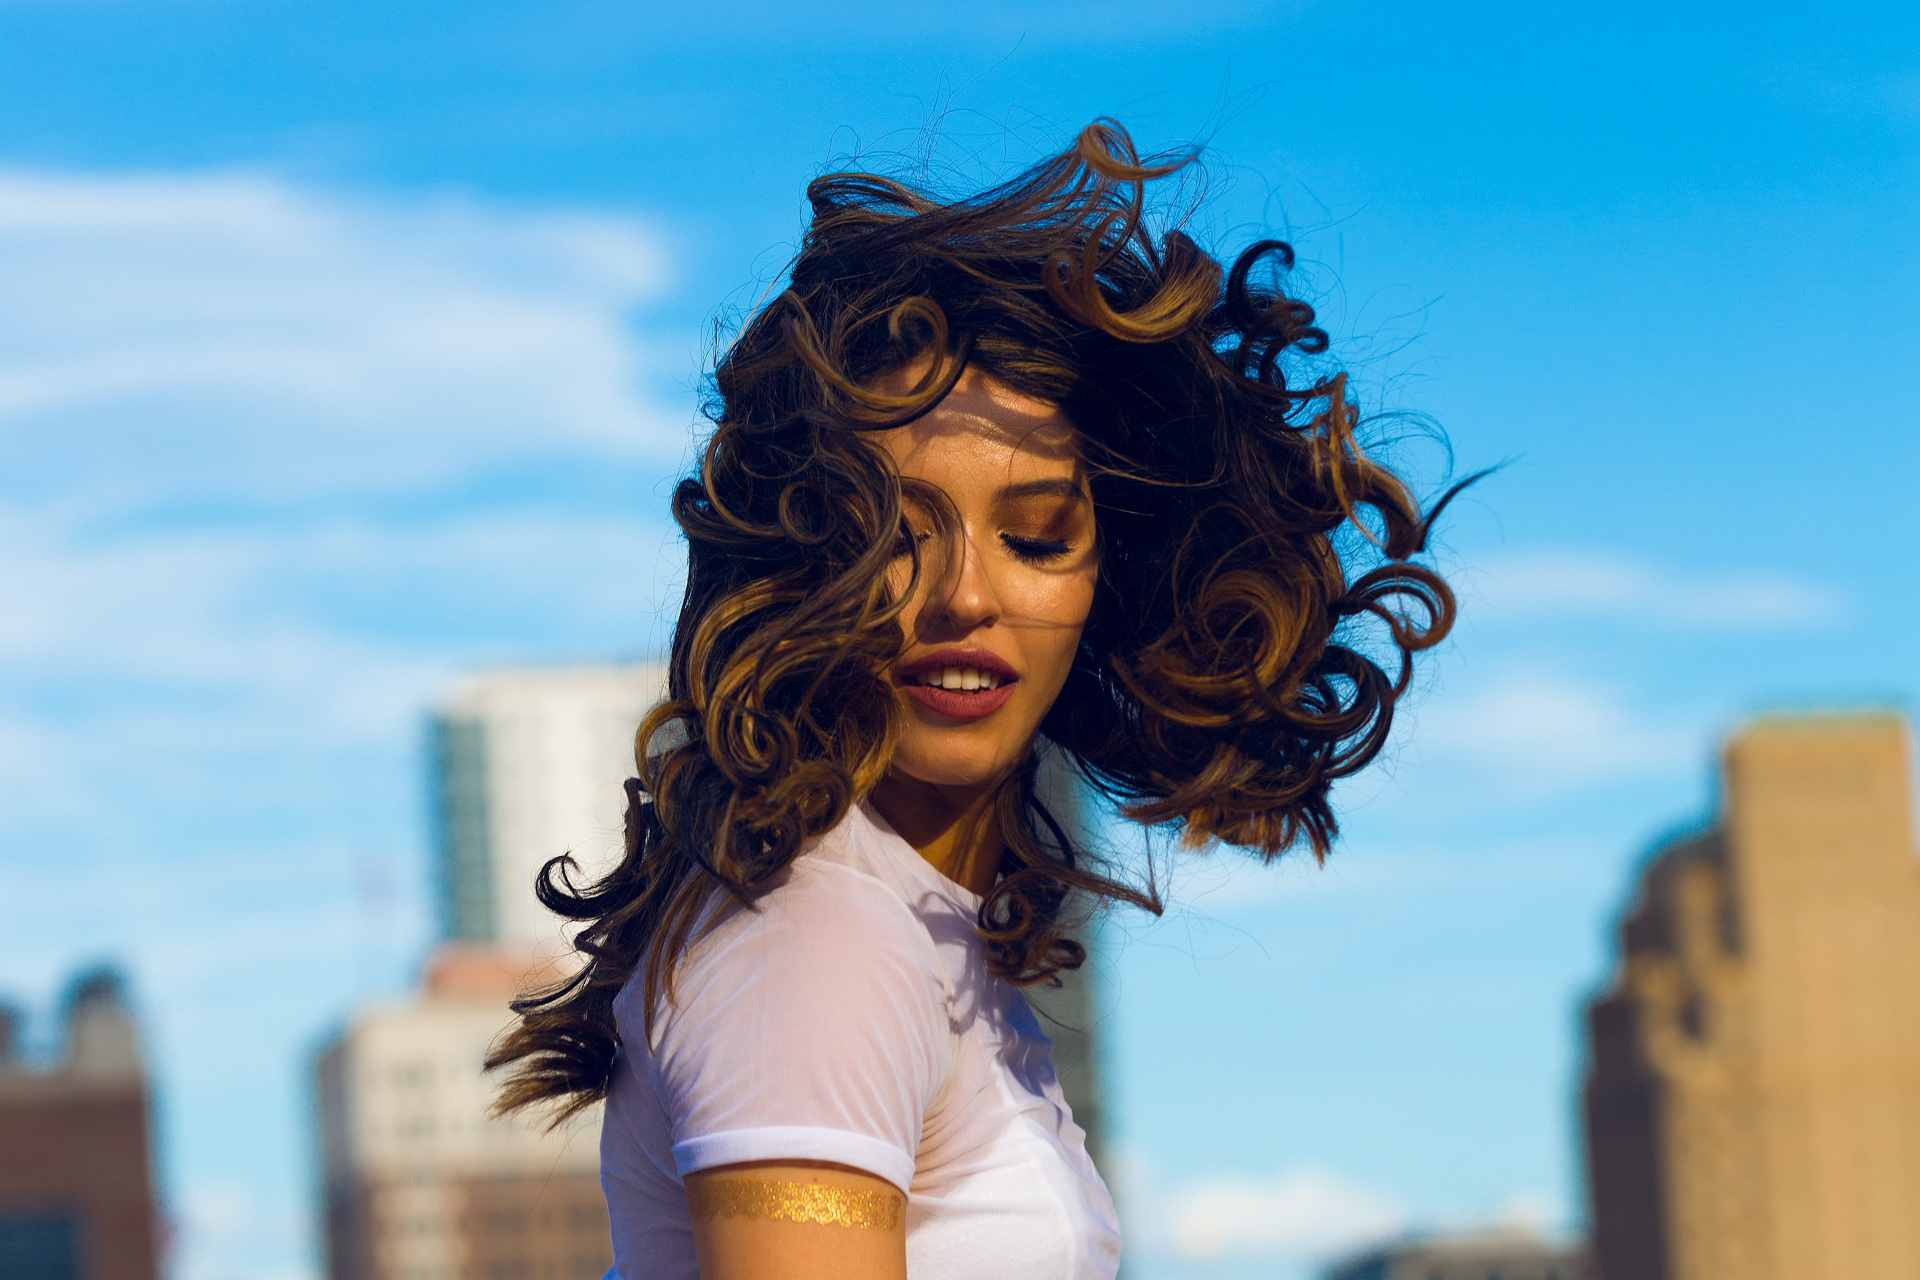 Close up of woman with curly hair being blown by the wind, in front of blue sky background